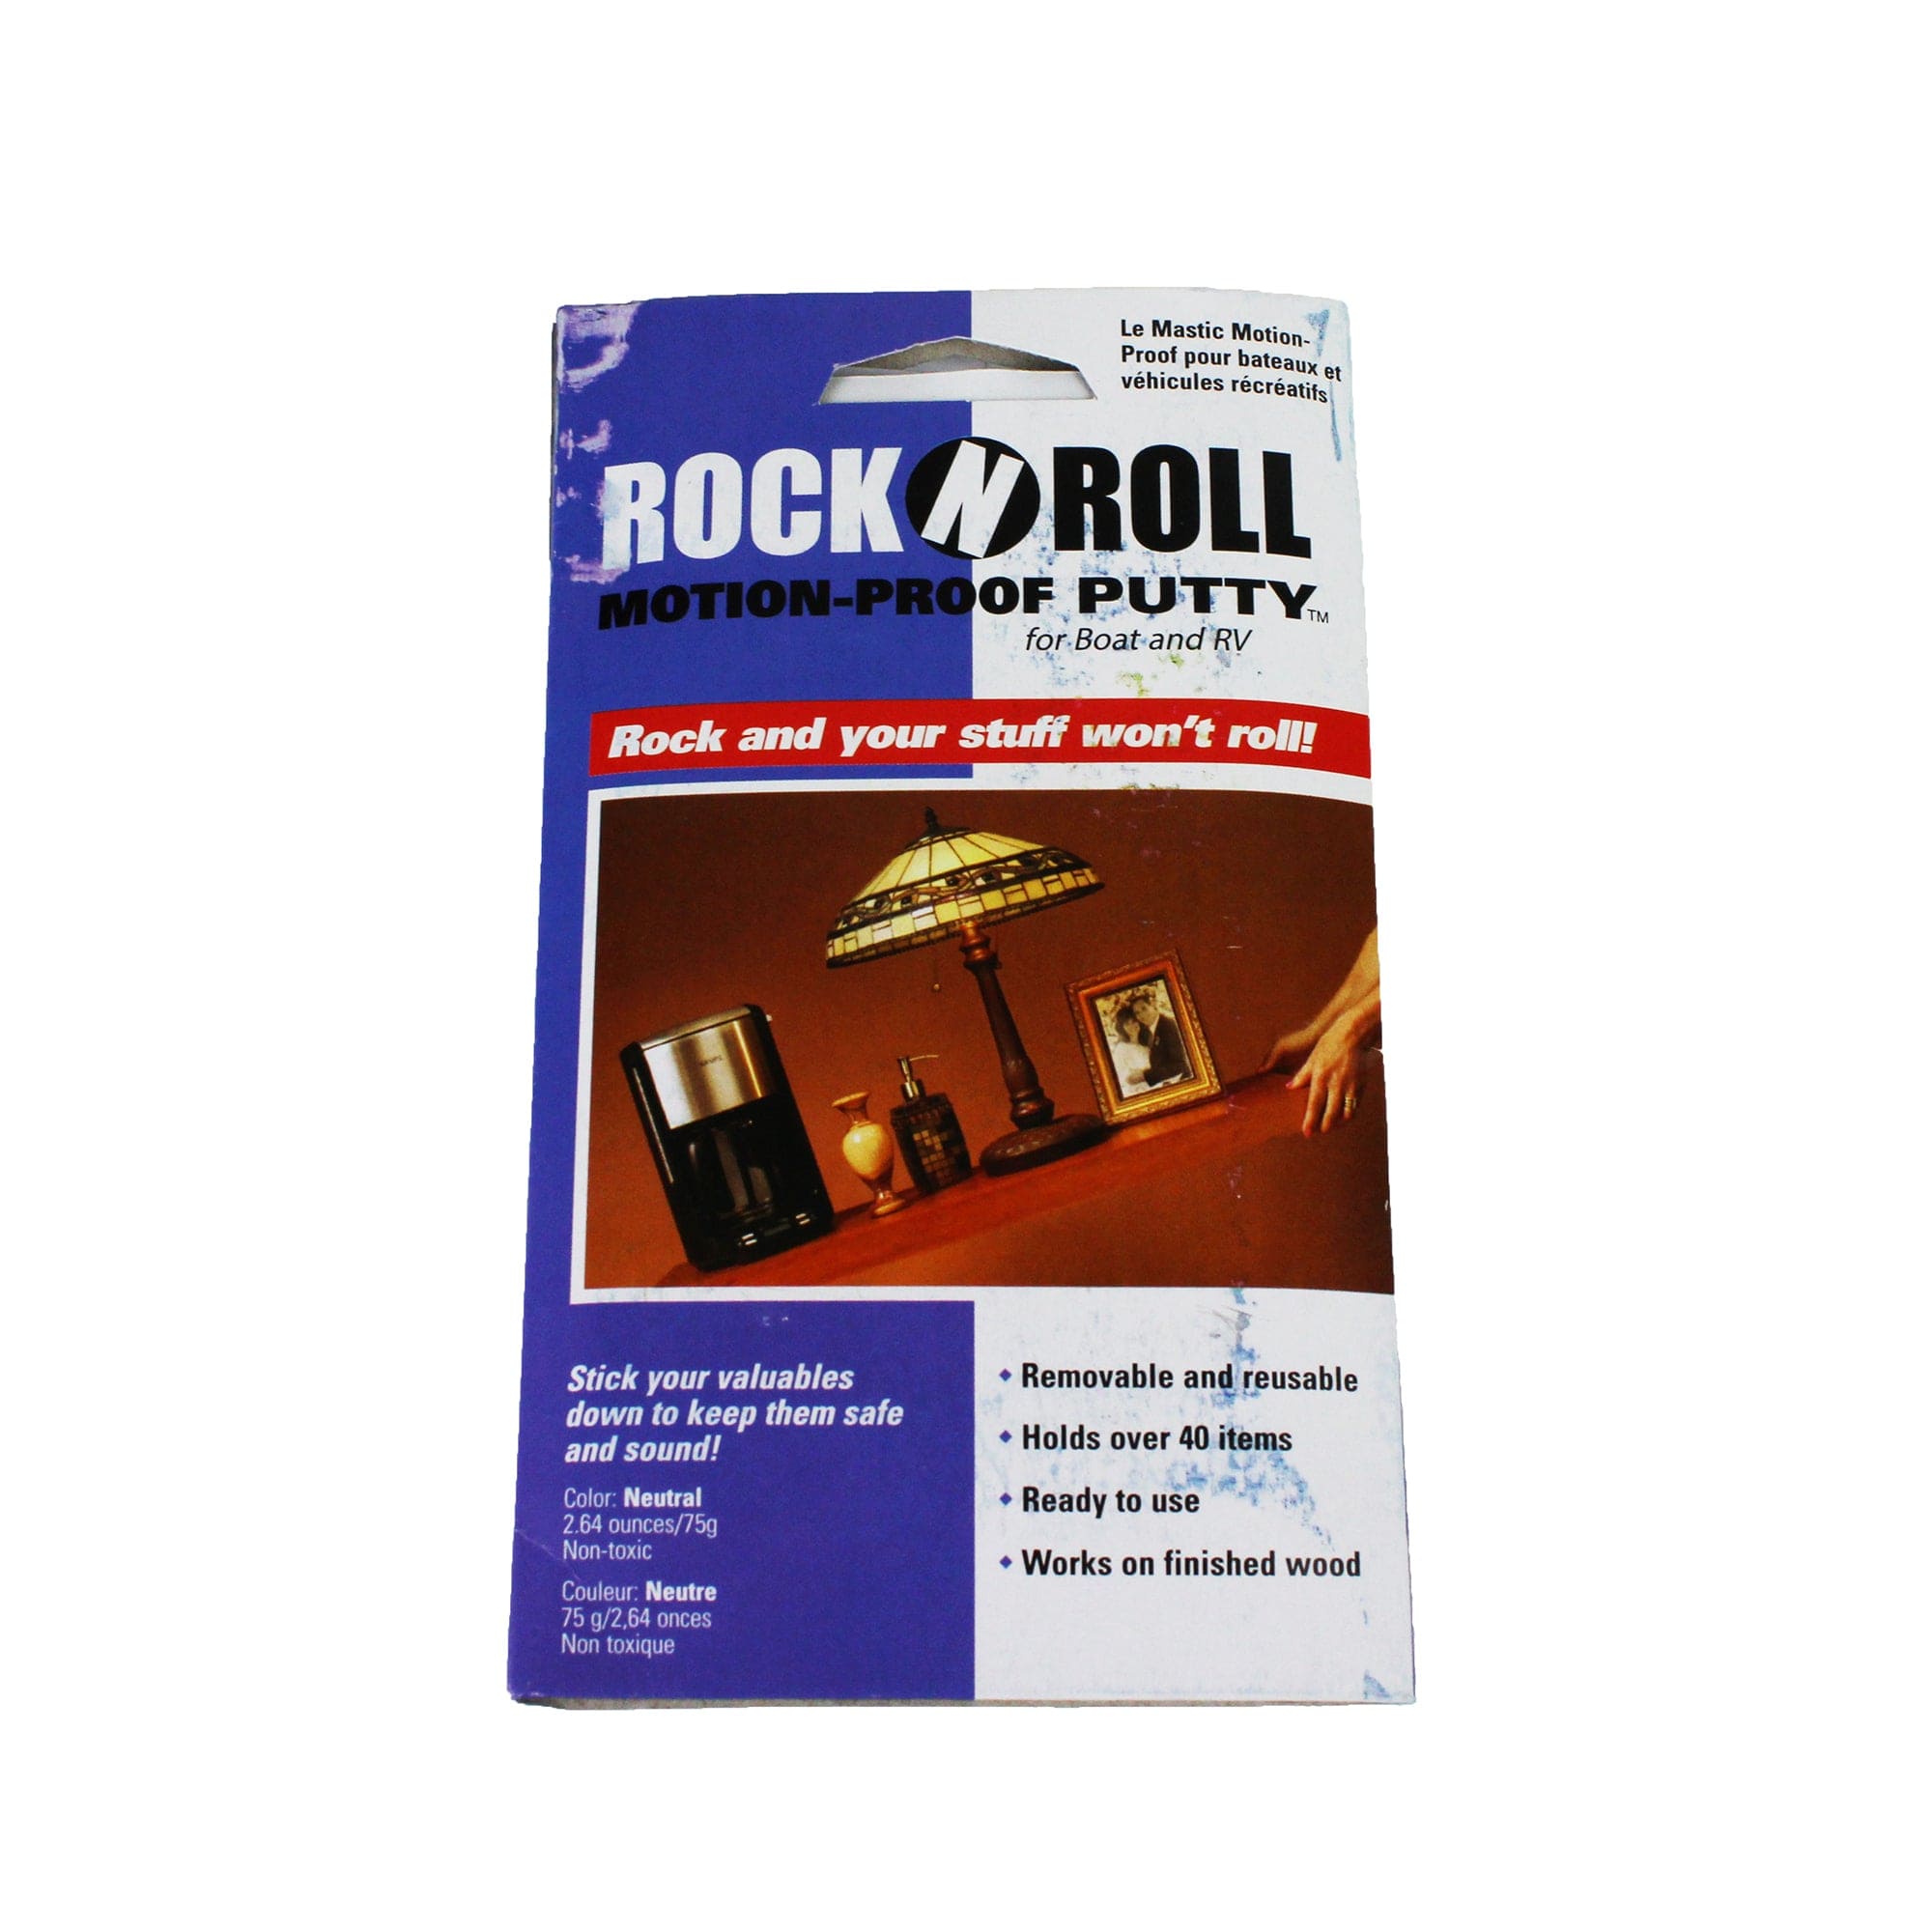 Ready America MRV88112 Rock N' Roll Motion Proof Putty